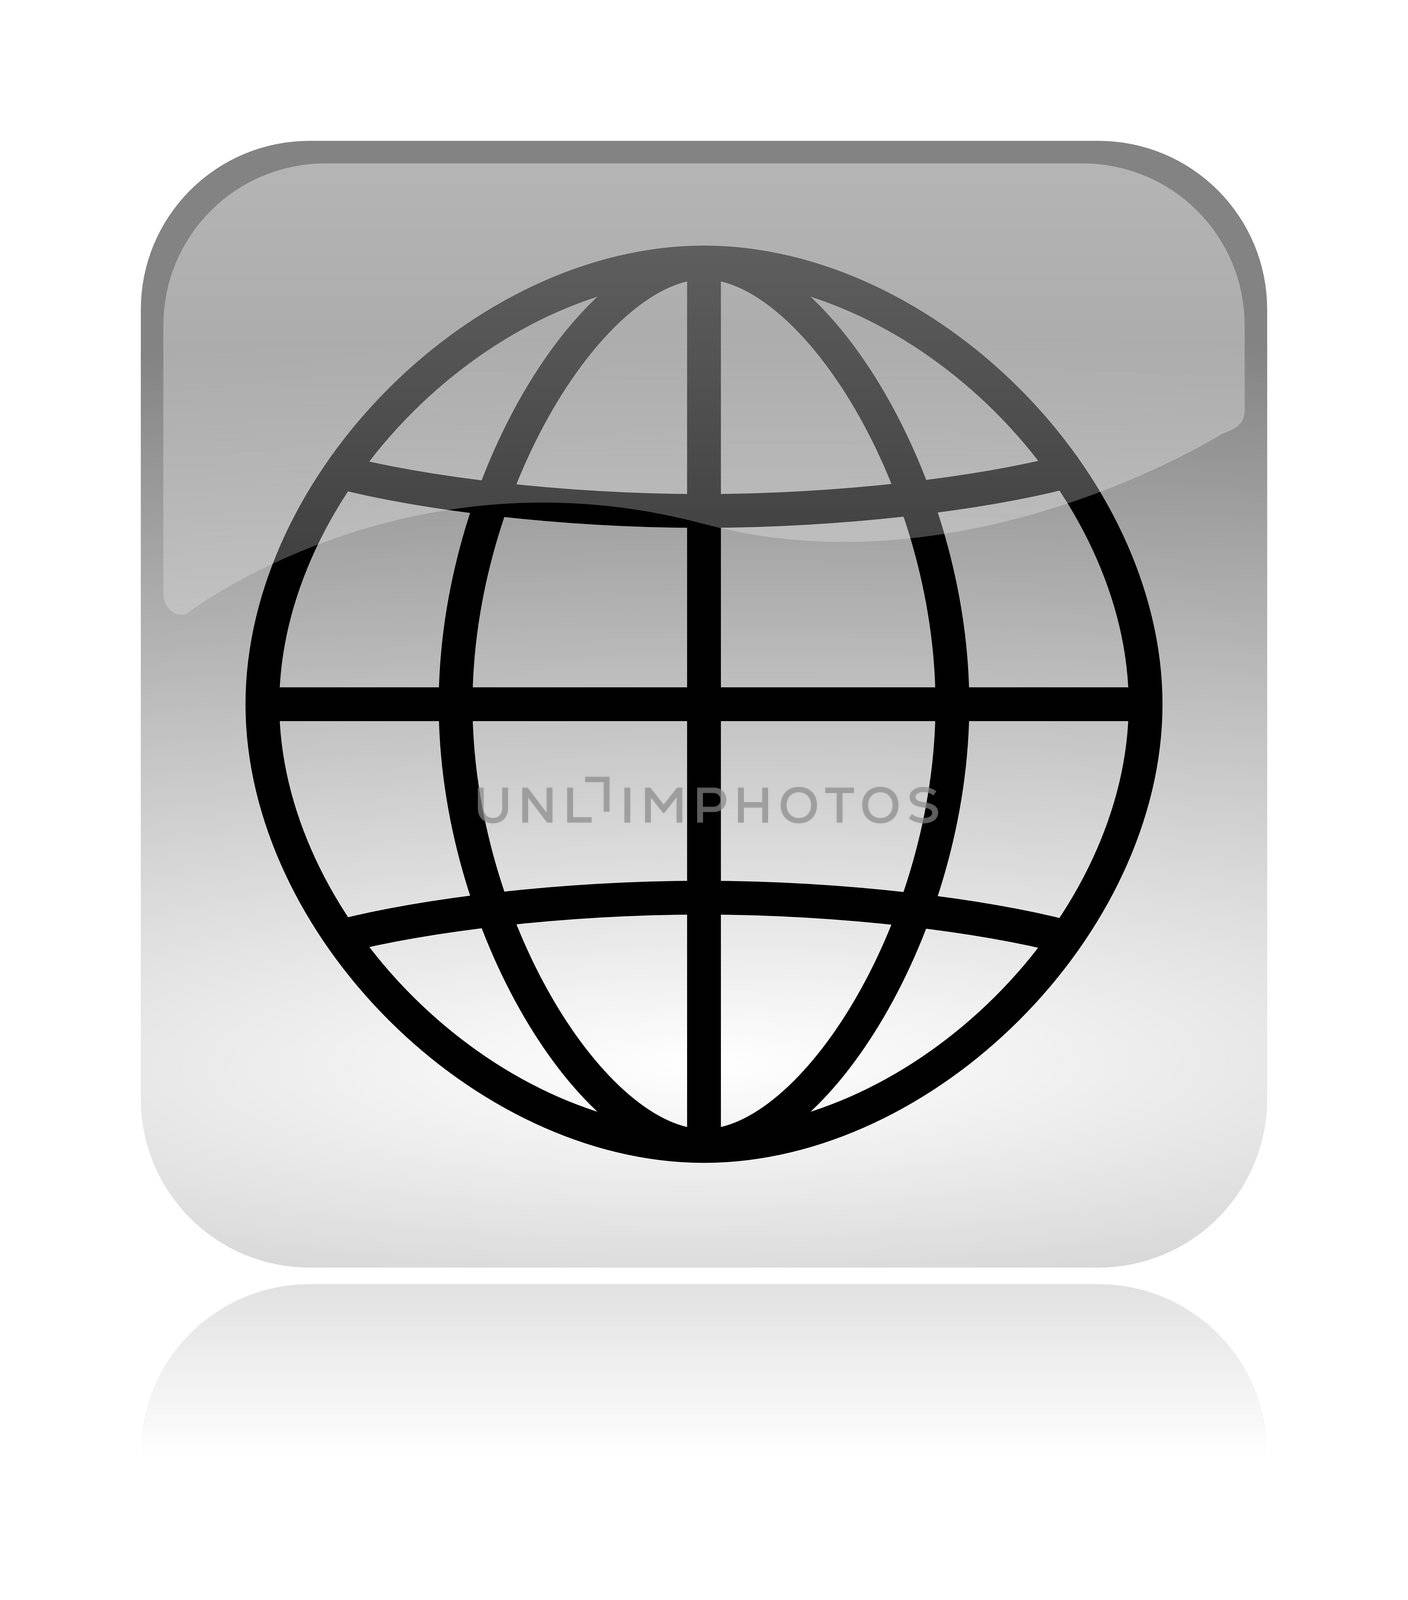 World meridians parallel white, transparent and glossy web interface icon with reflection